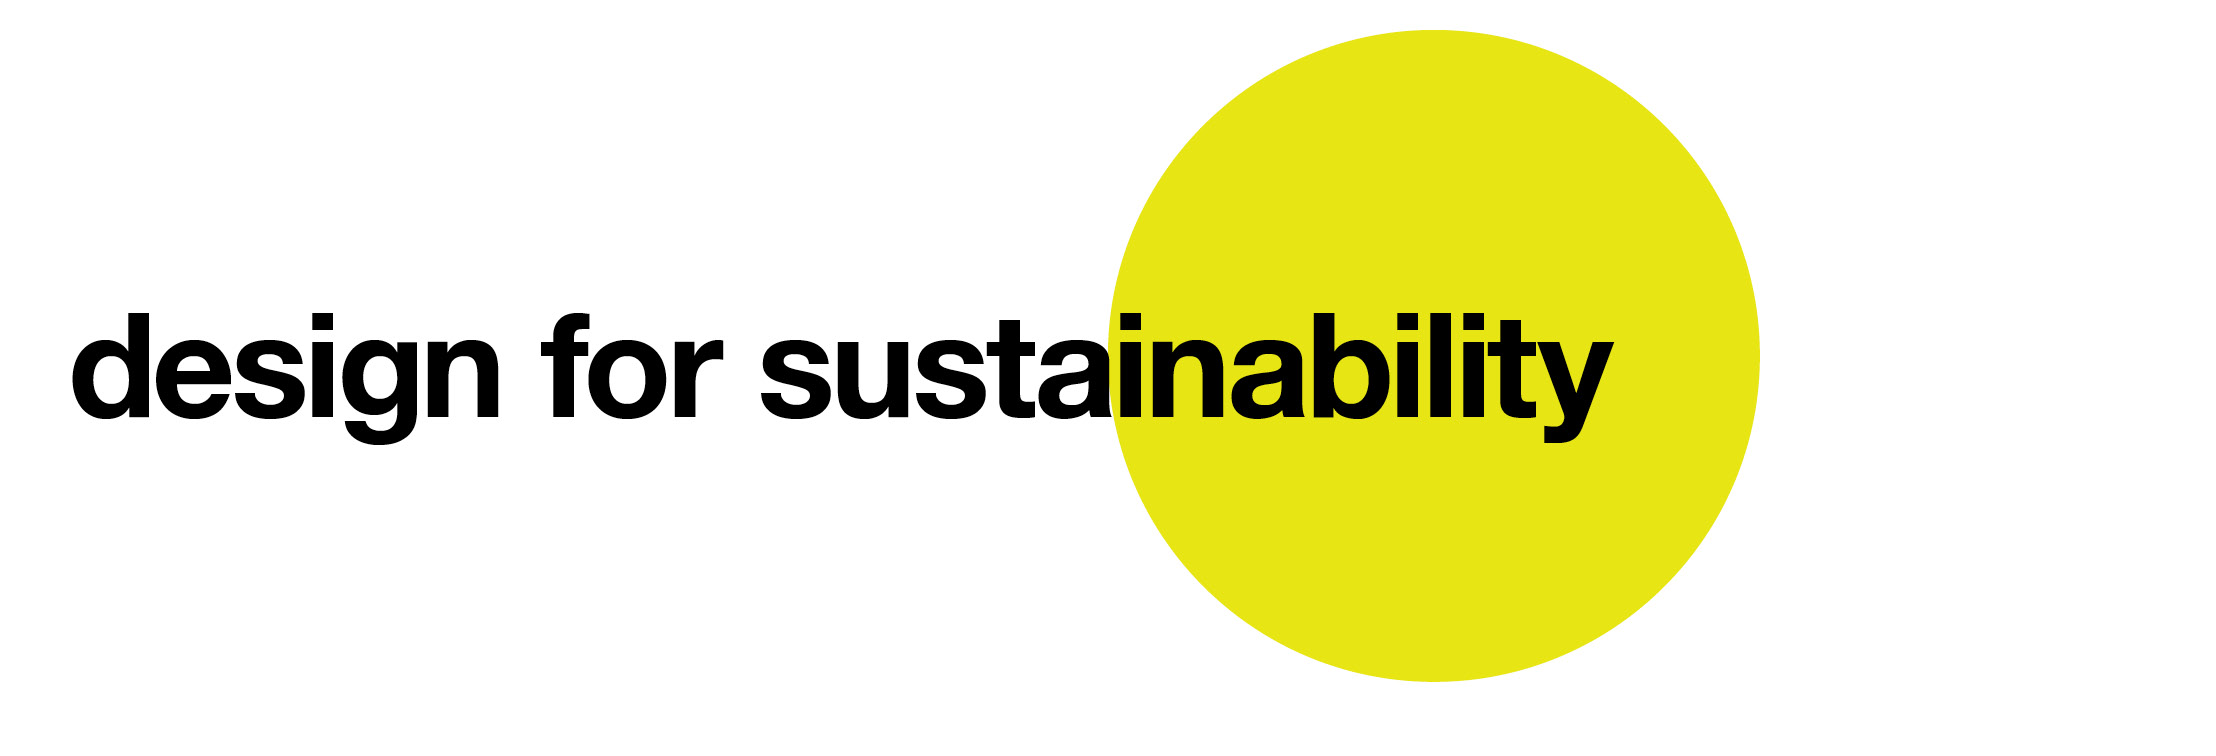 snapshot of current issues in design for sustainability